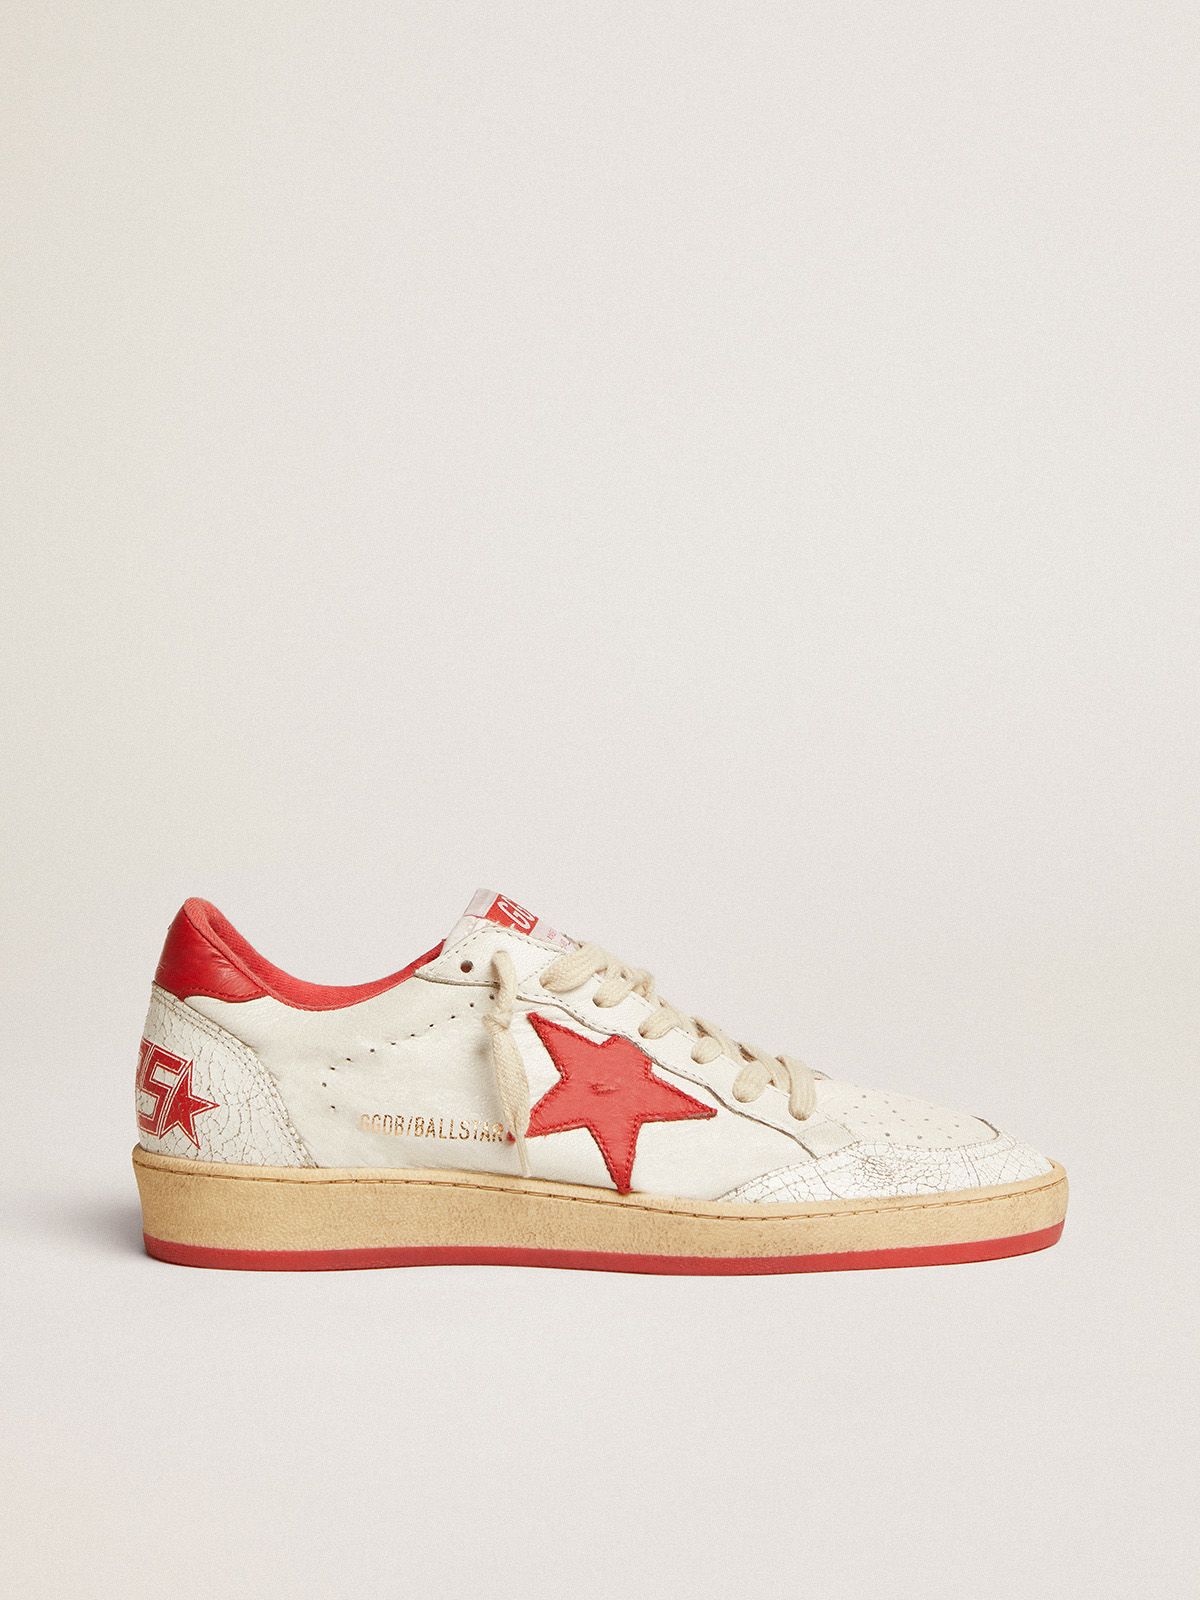 golden goose heel leather star in red and Star tab with sneakers White Ball